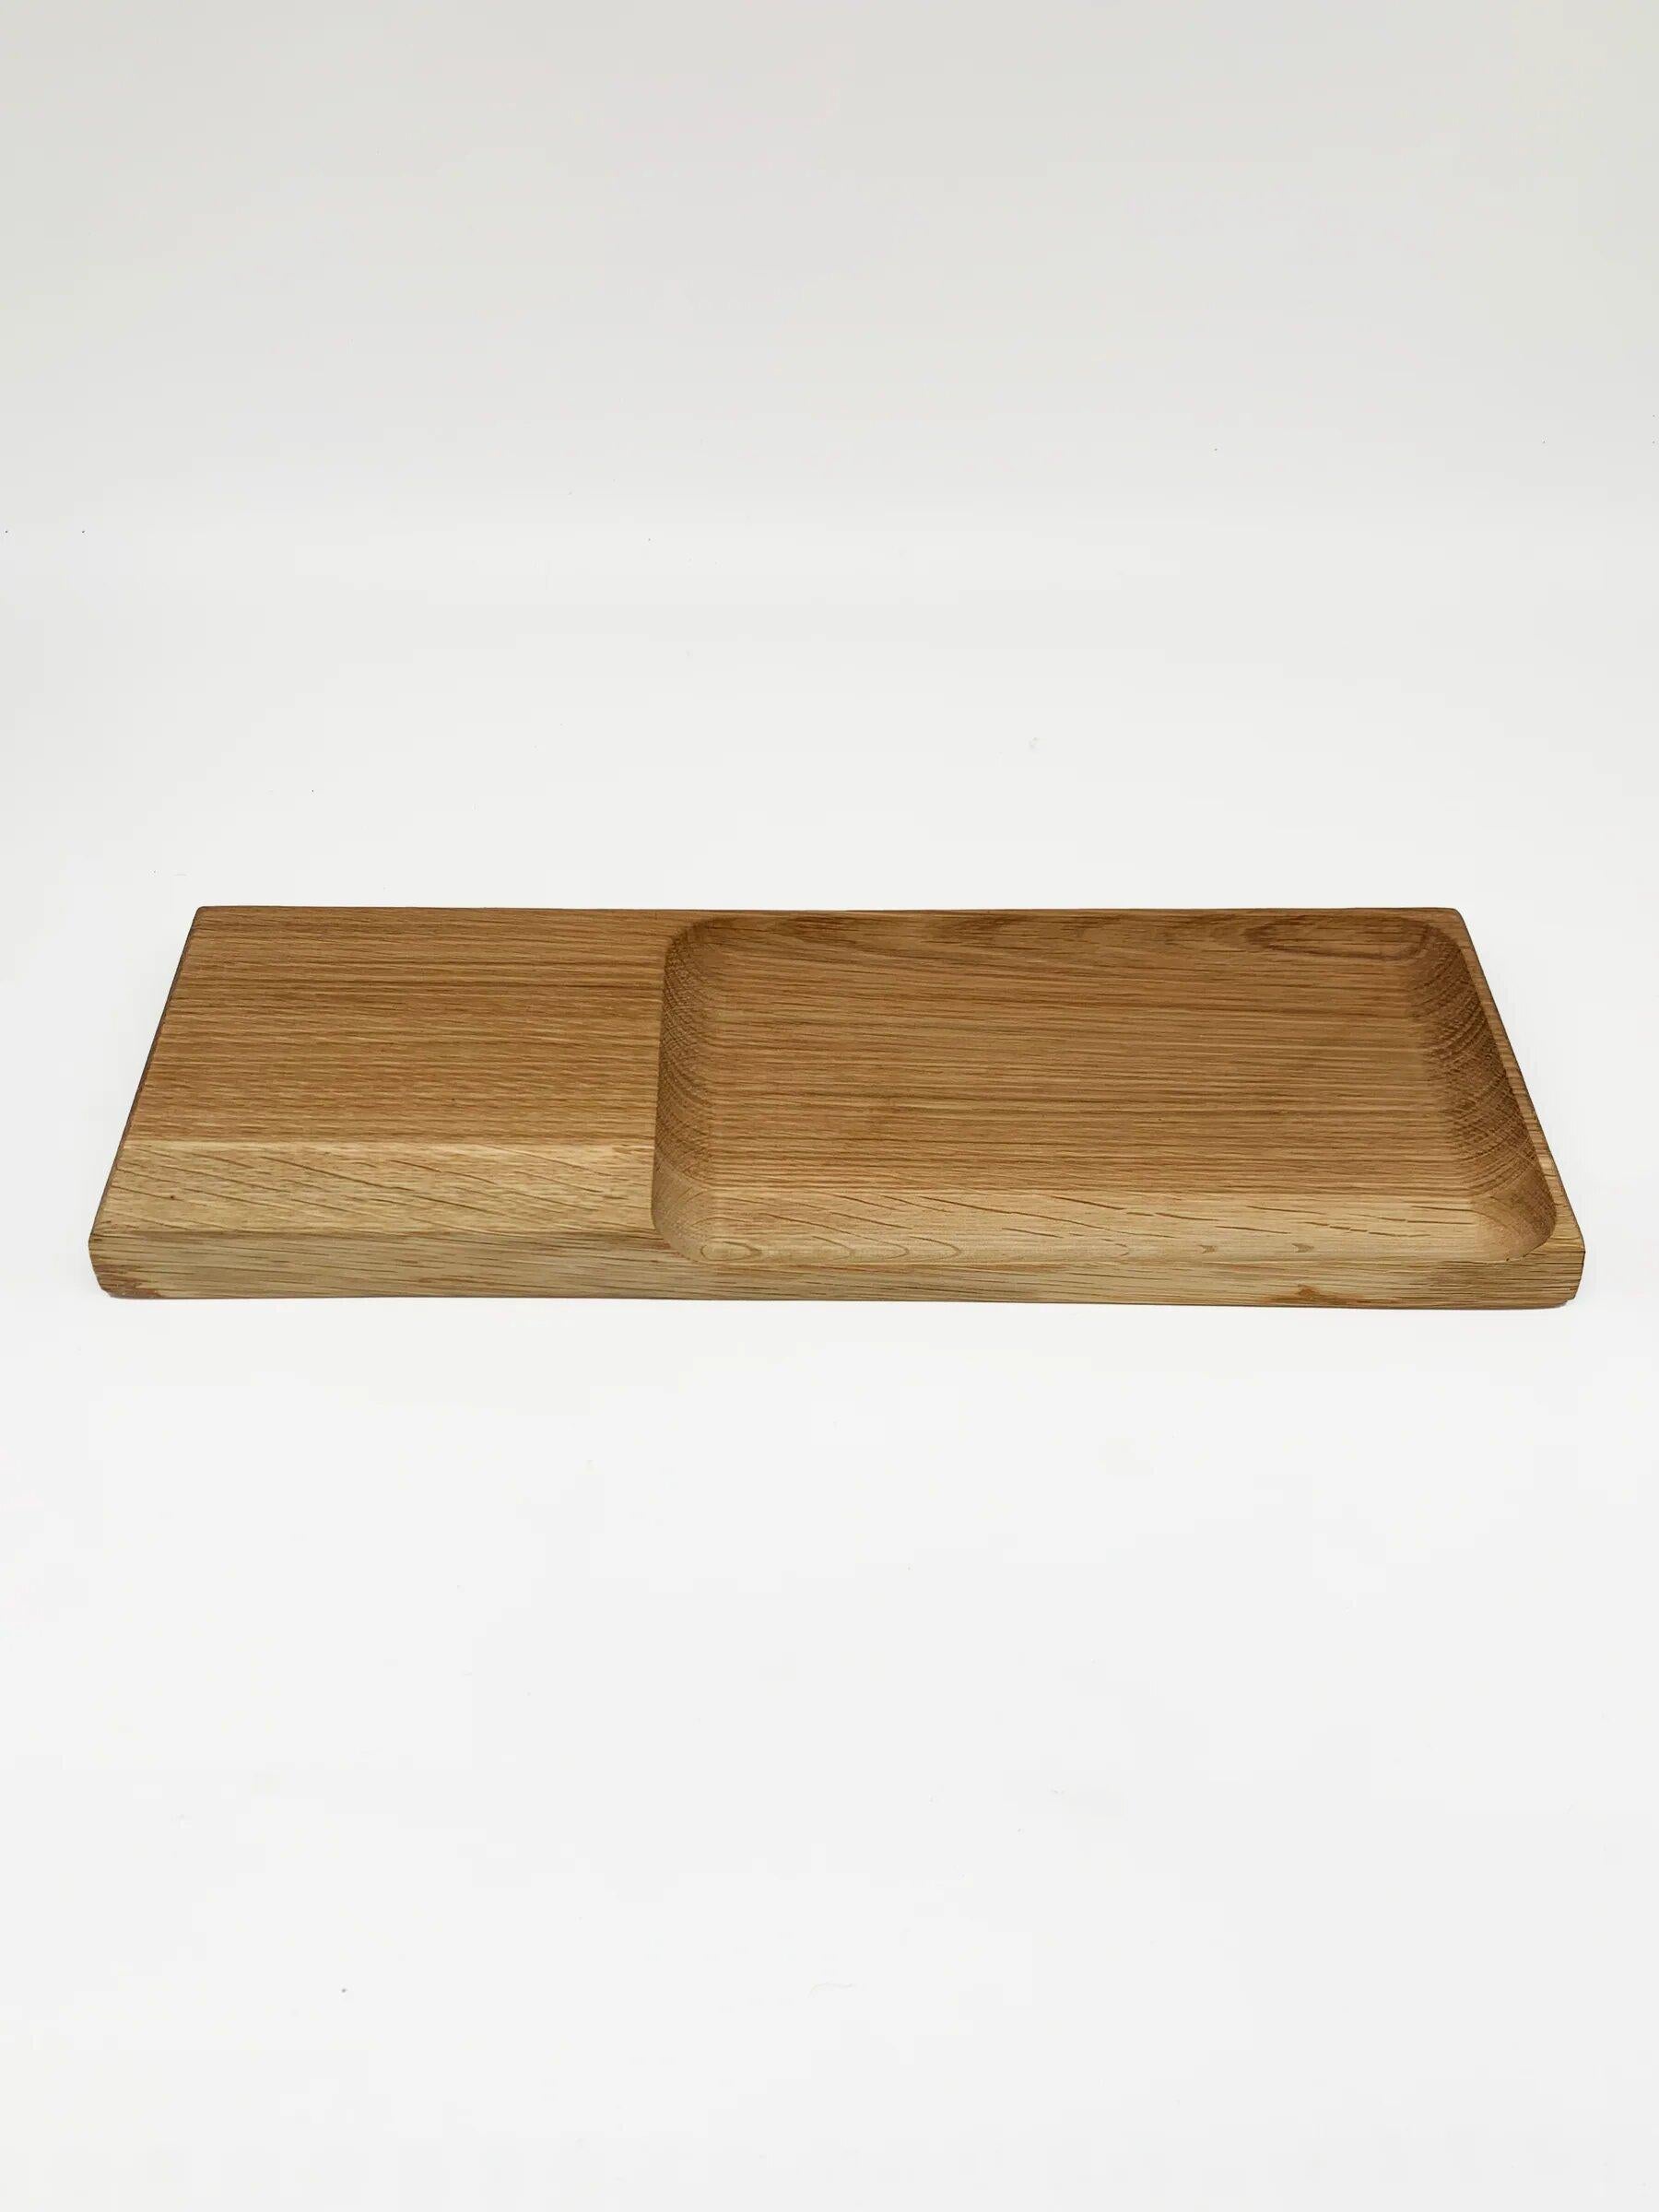 Serve your guests in style with our Mini Trunk Platter. Unique and eye-catching, this platter is perfect for adding  beauty to your table setting. Made from natural materials, it's easy to wash and can be coated with olive oil to keep it looking